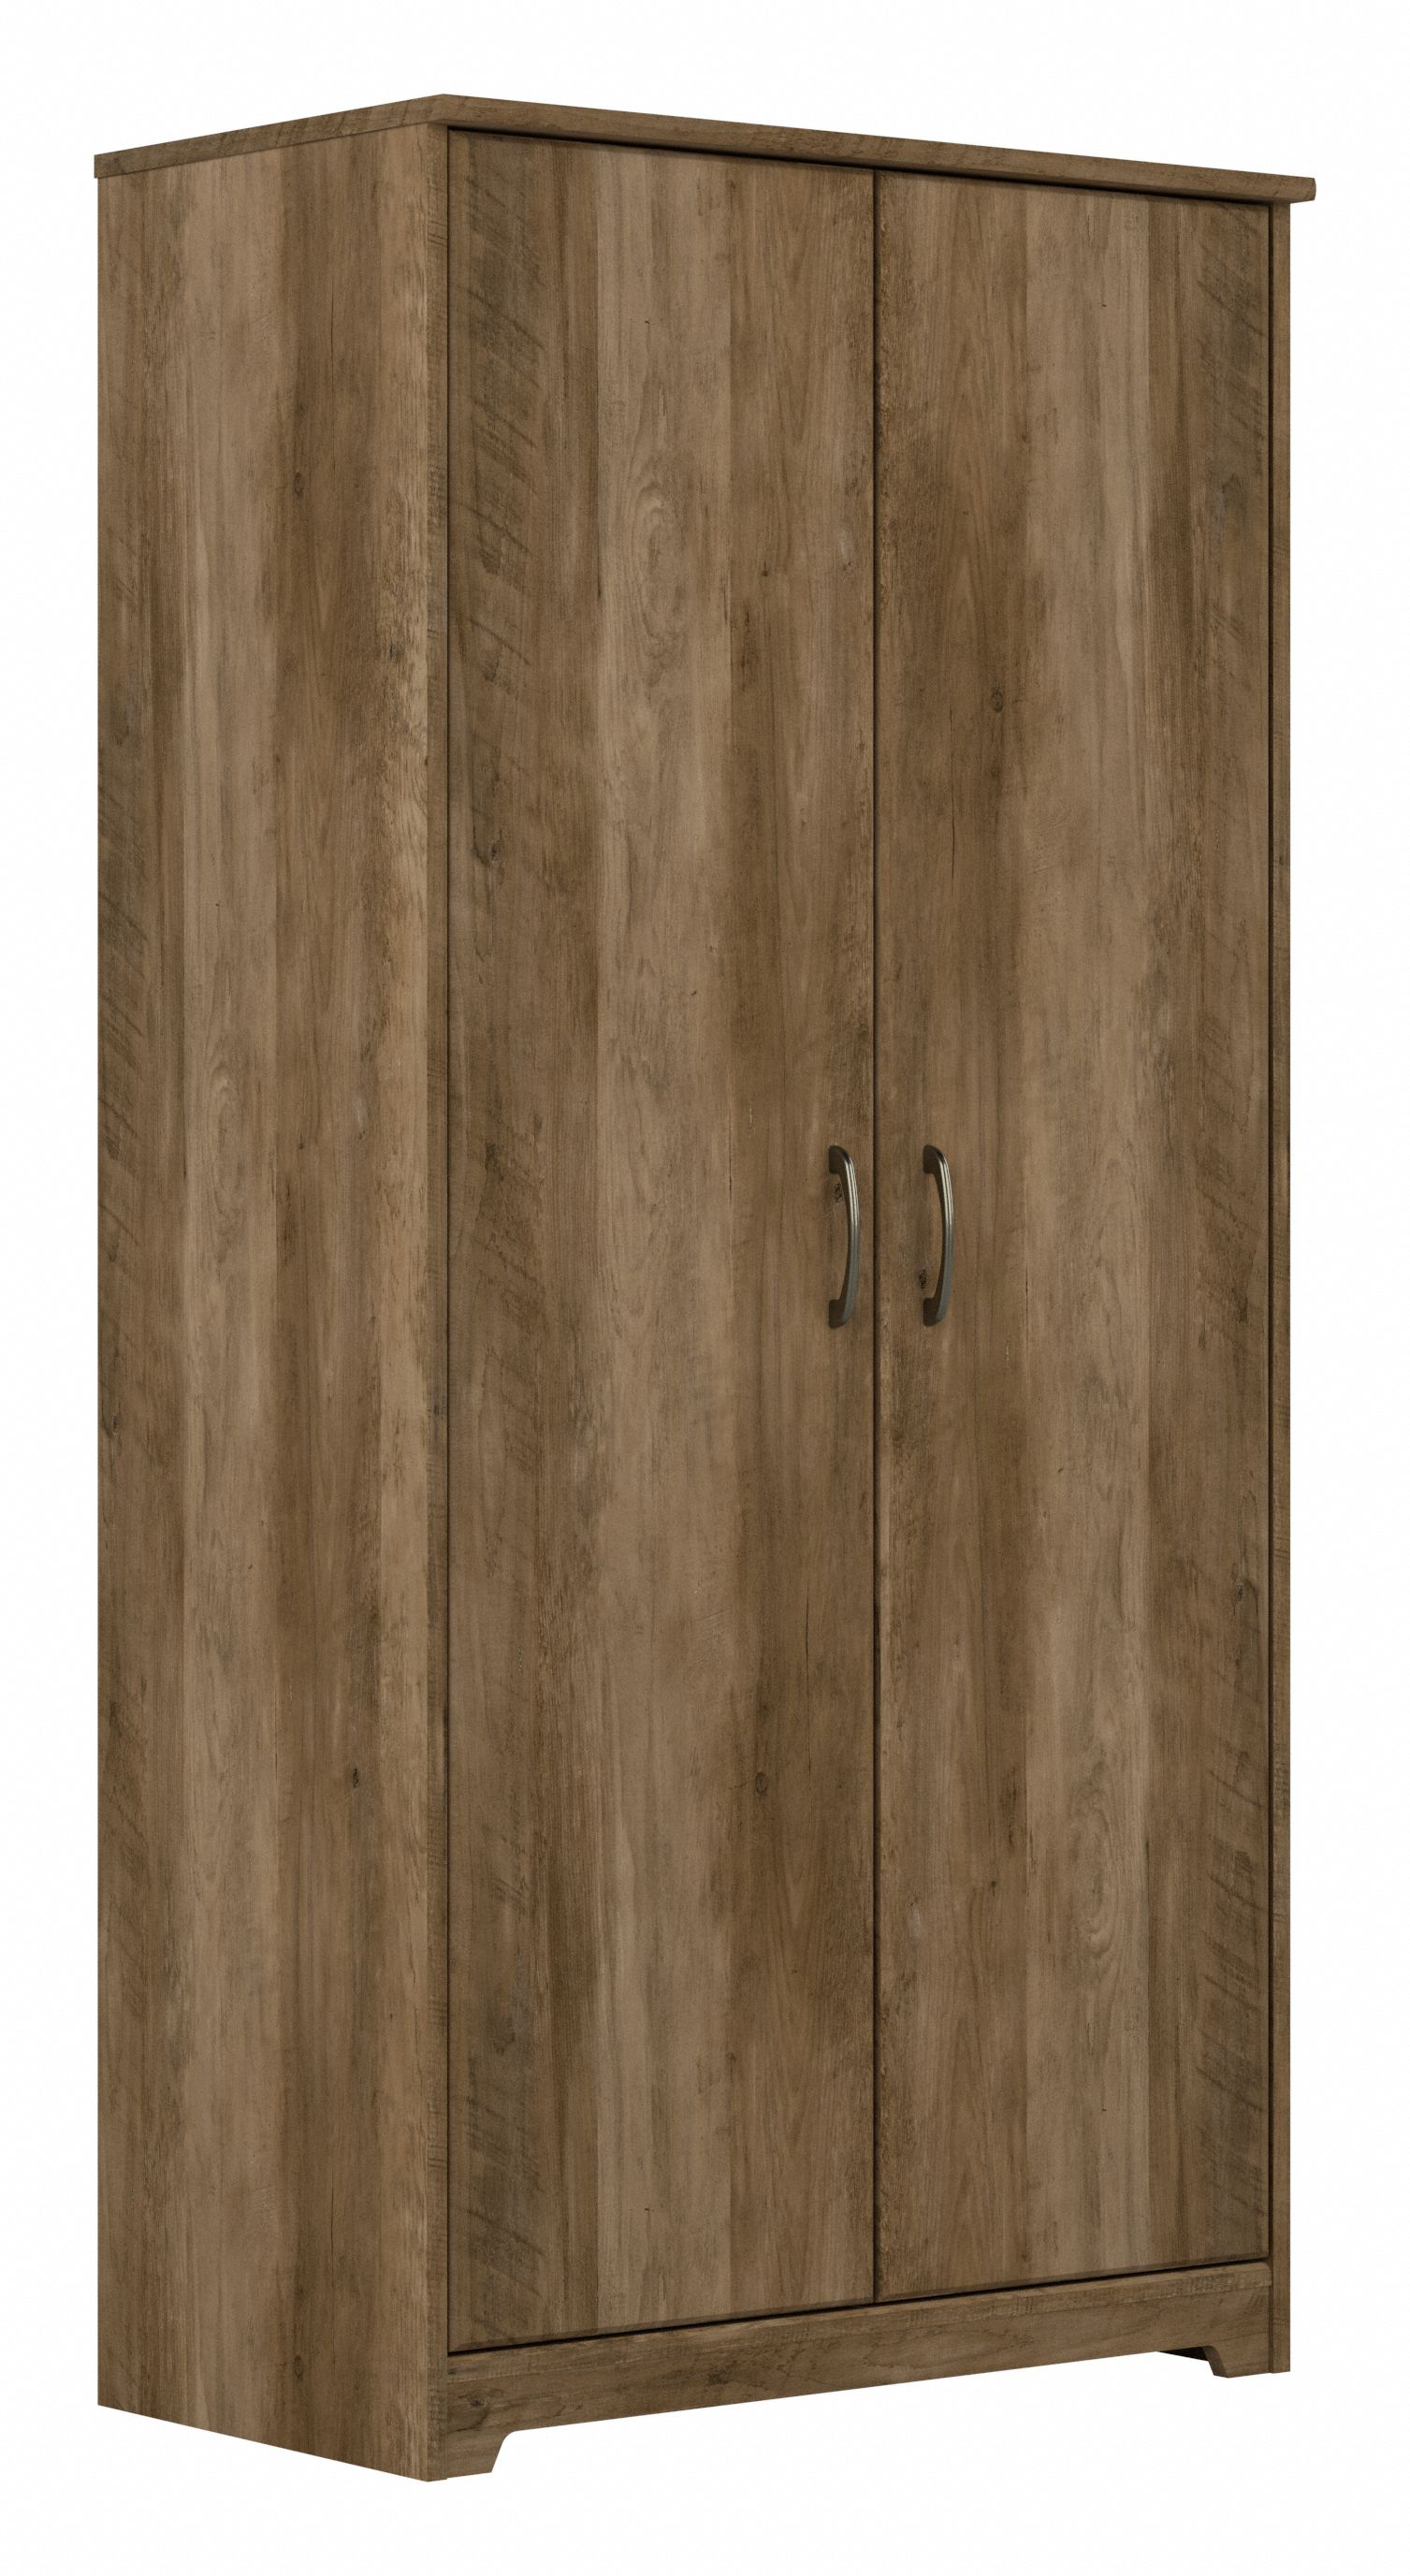 Shop Bush Furniture Cabot Tall Storage Cabinet with Doors 02 WC31599 #color_reclaimed pine